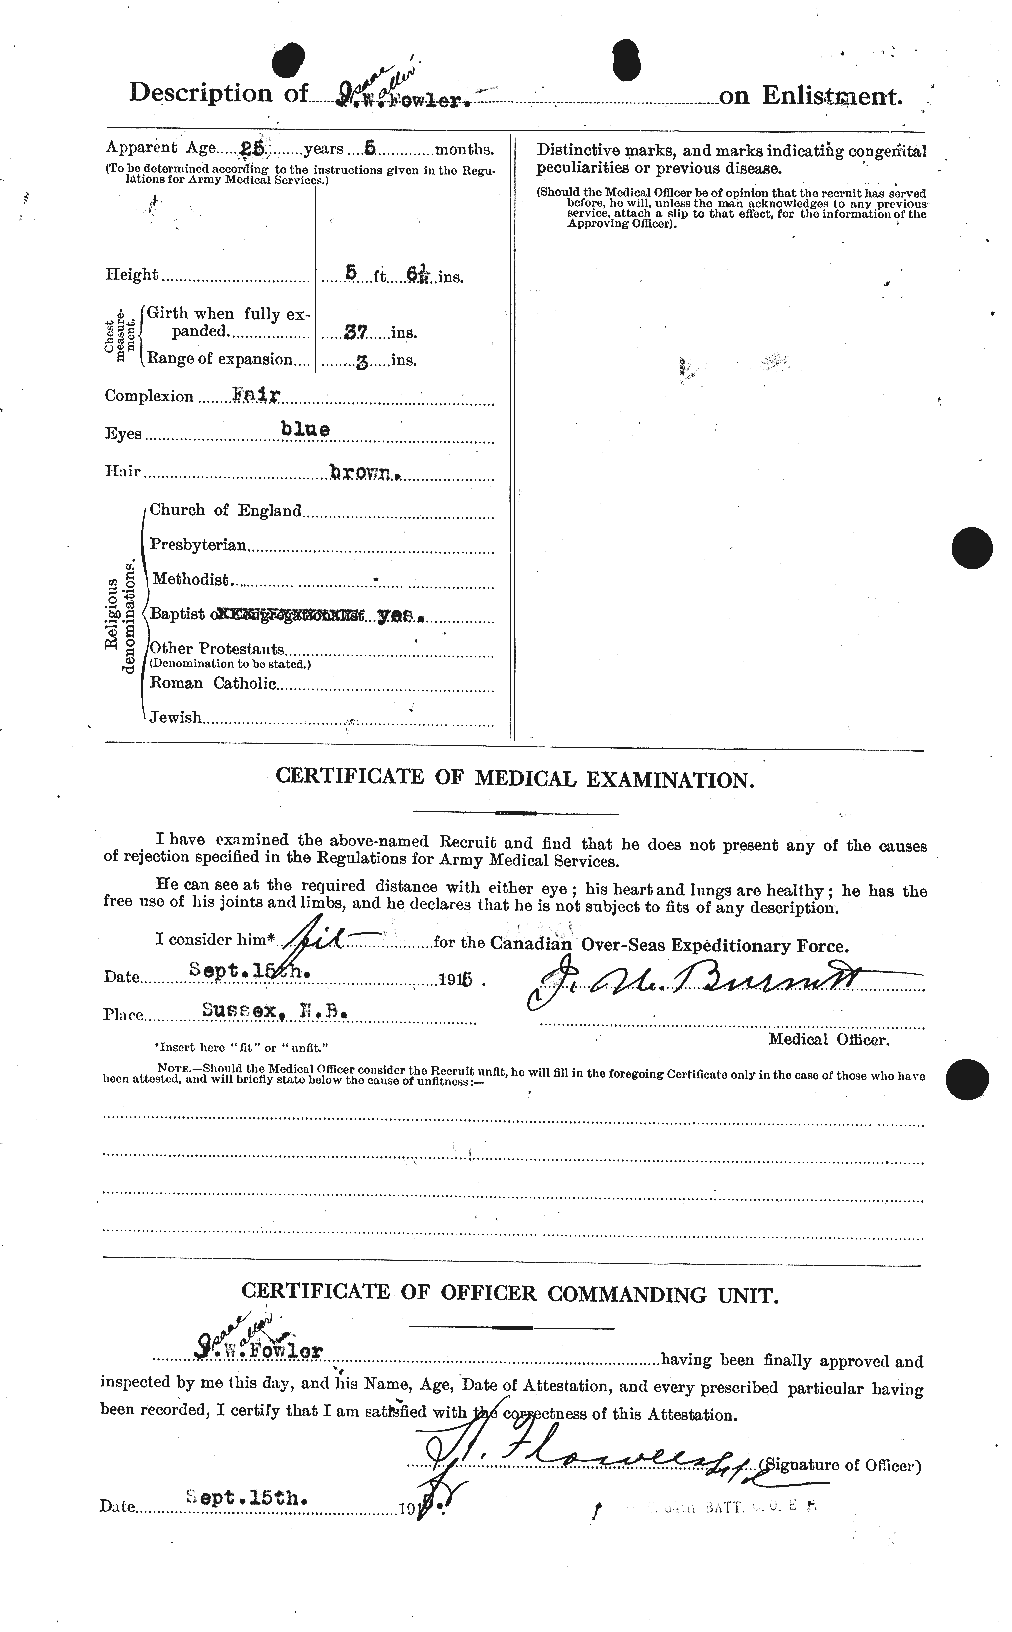 Personnel Records of the First World War - CEF 333092b